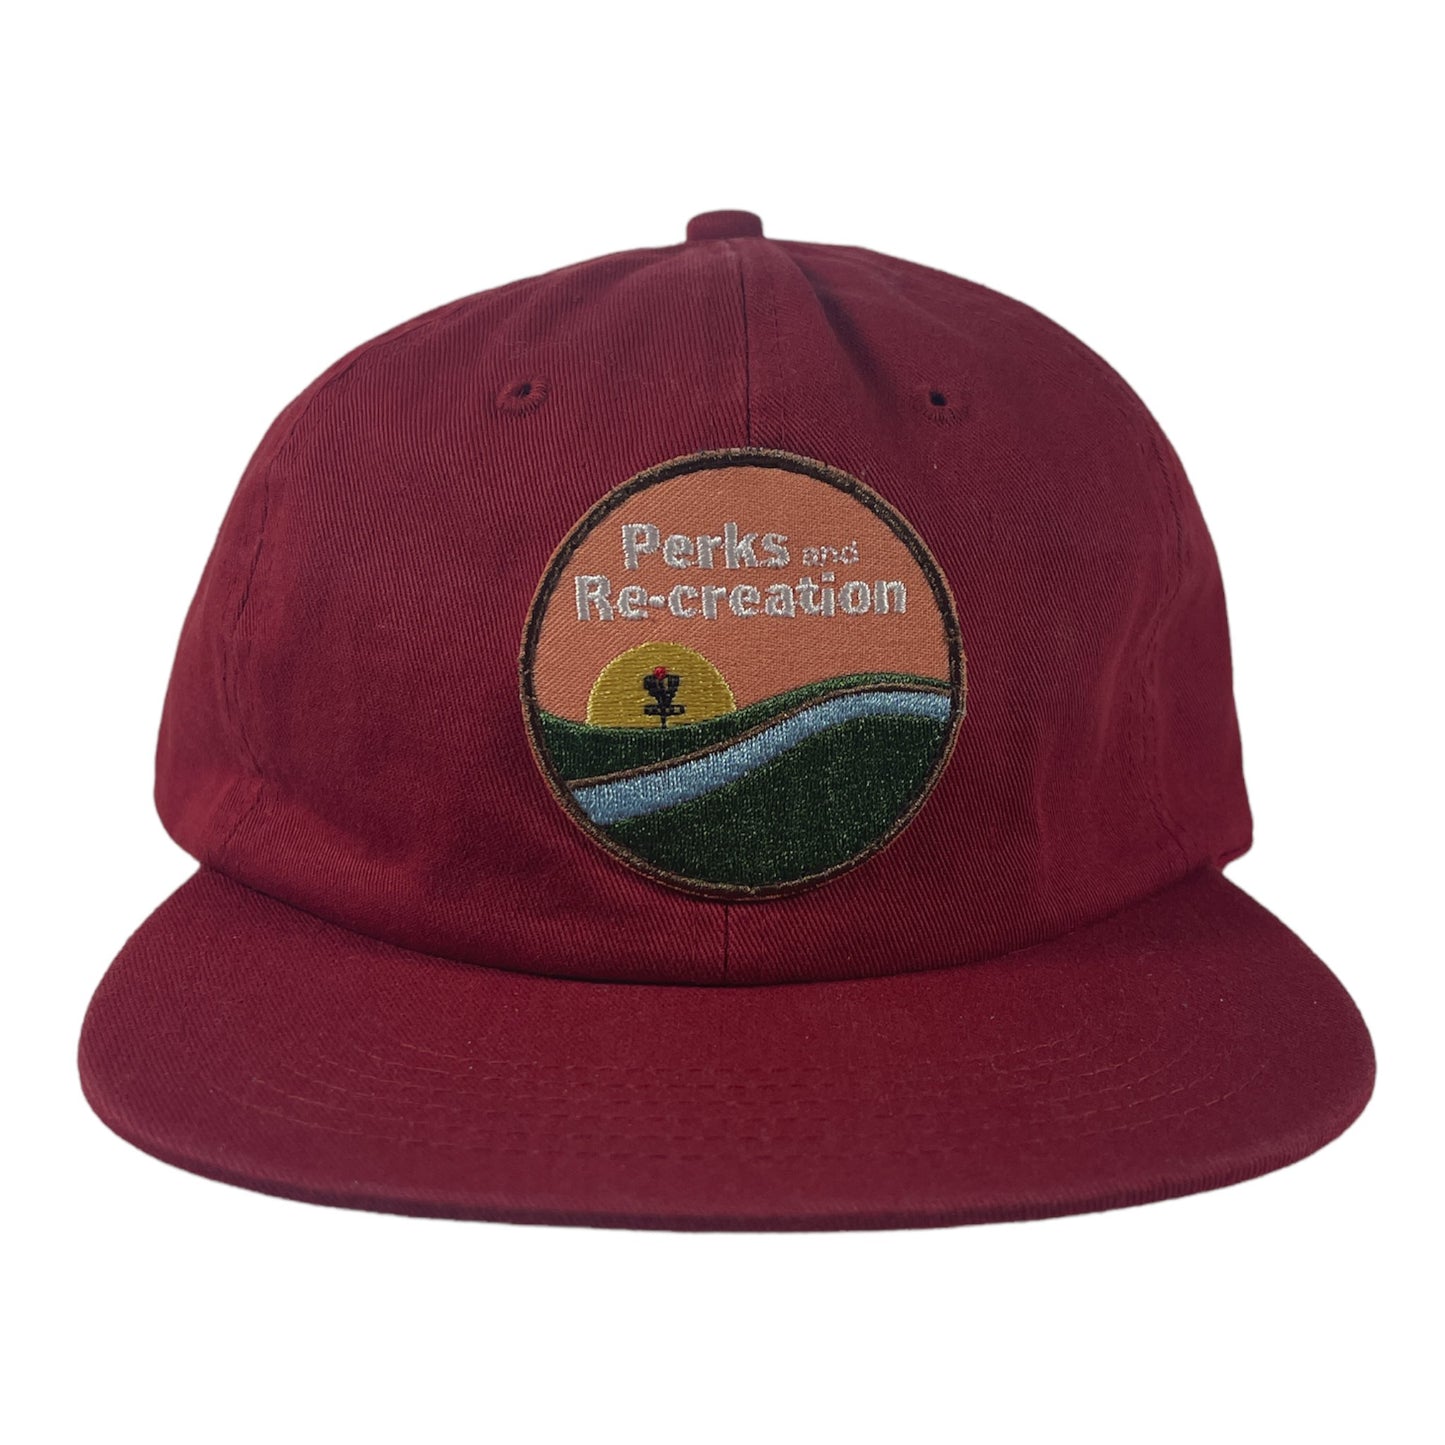 Perks and Re-creation Day Perk Ranger Hat Disc Golf